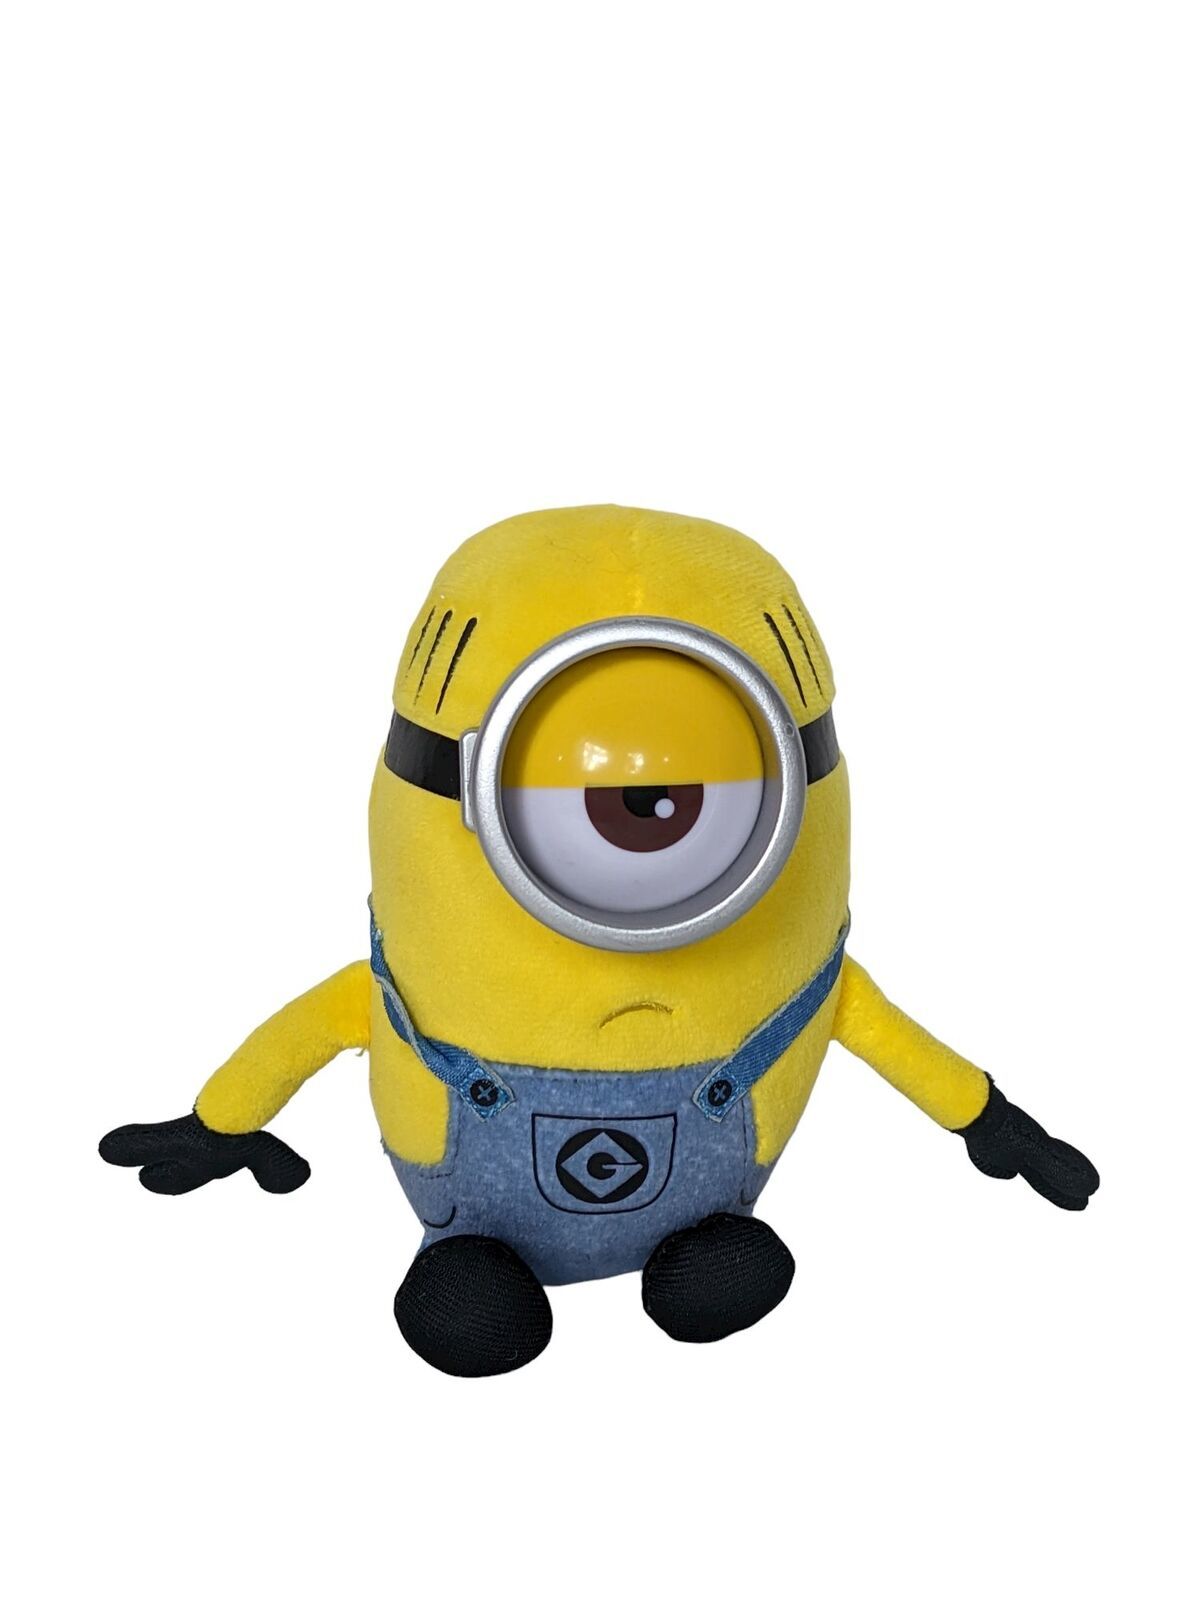 Primary image for Ty Despicable Me 3 Minion Mel Overalls Plush Stuffed Animal 2017 5.75"